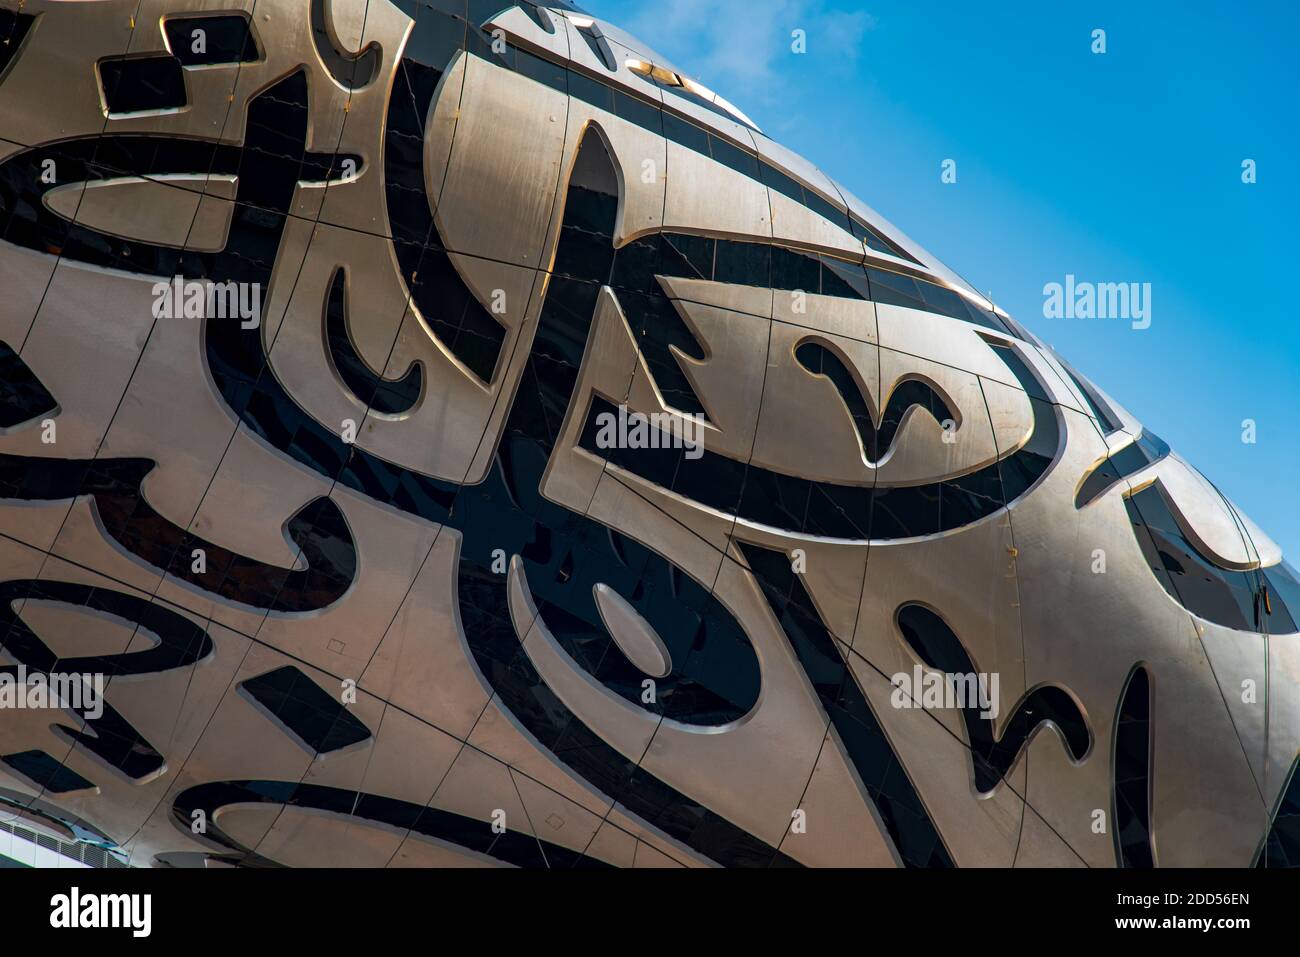 Dubai, United Arab Emirates - November 13, 2020: Closeup pattern of Arabic letters on The Museum of The Future in Dubai downtown built for EXPO 2020 s Stock Photo